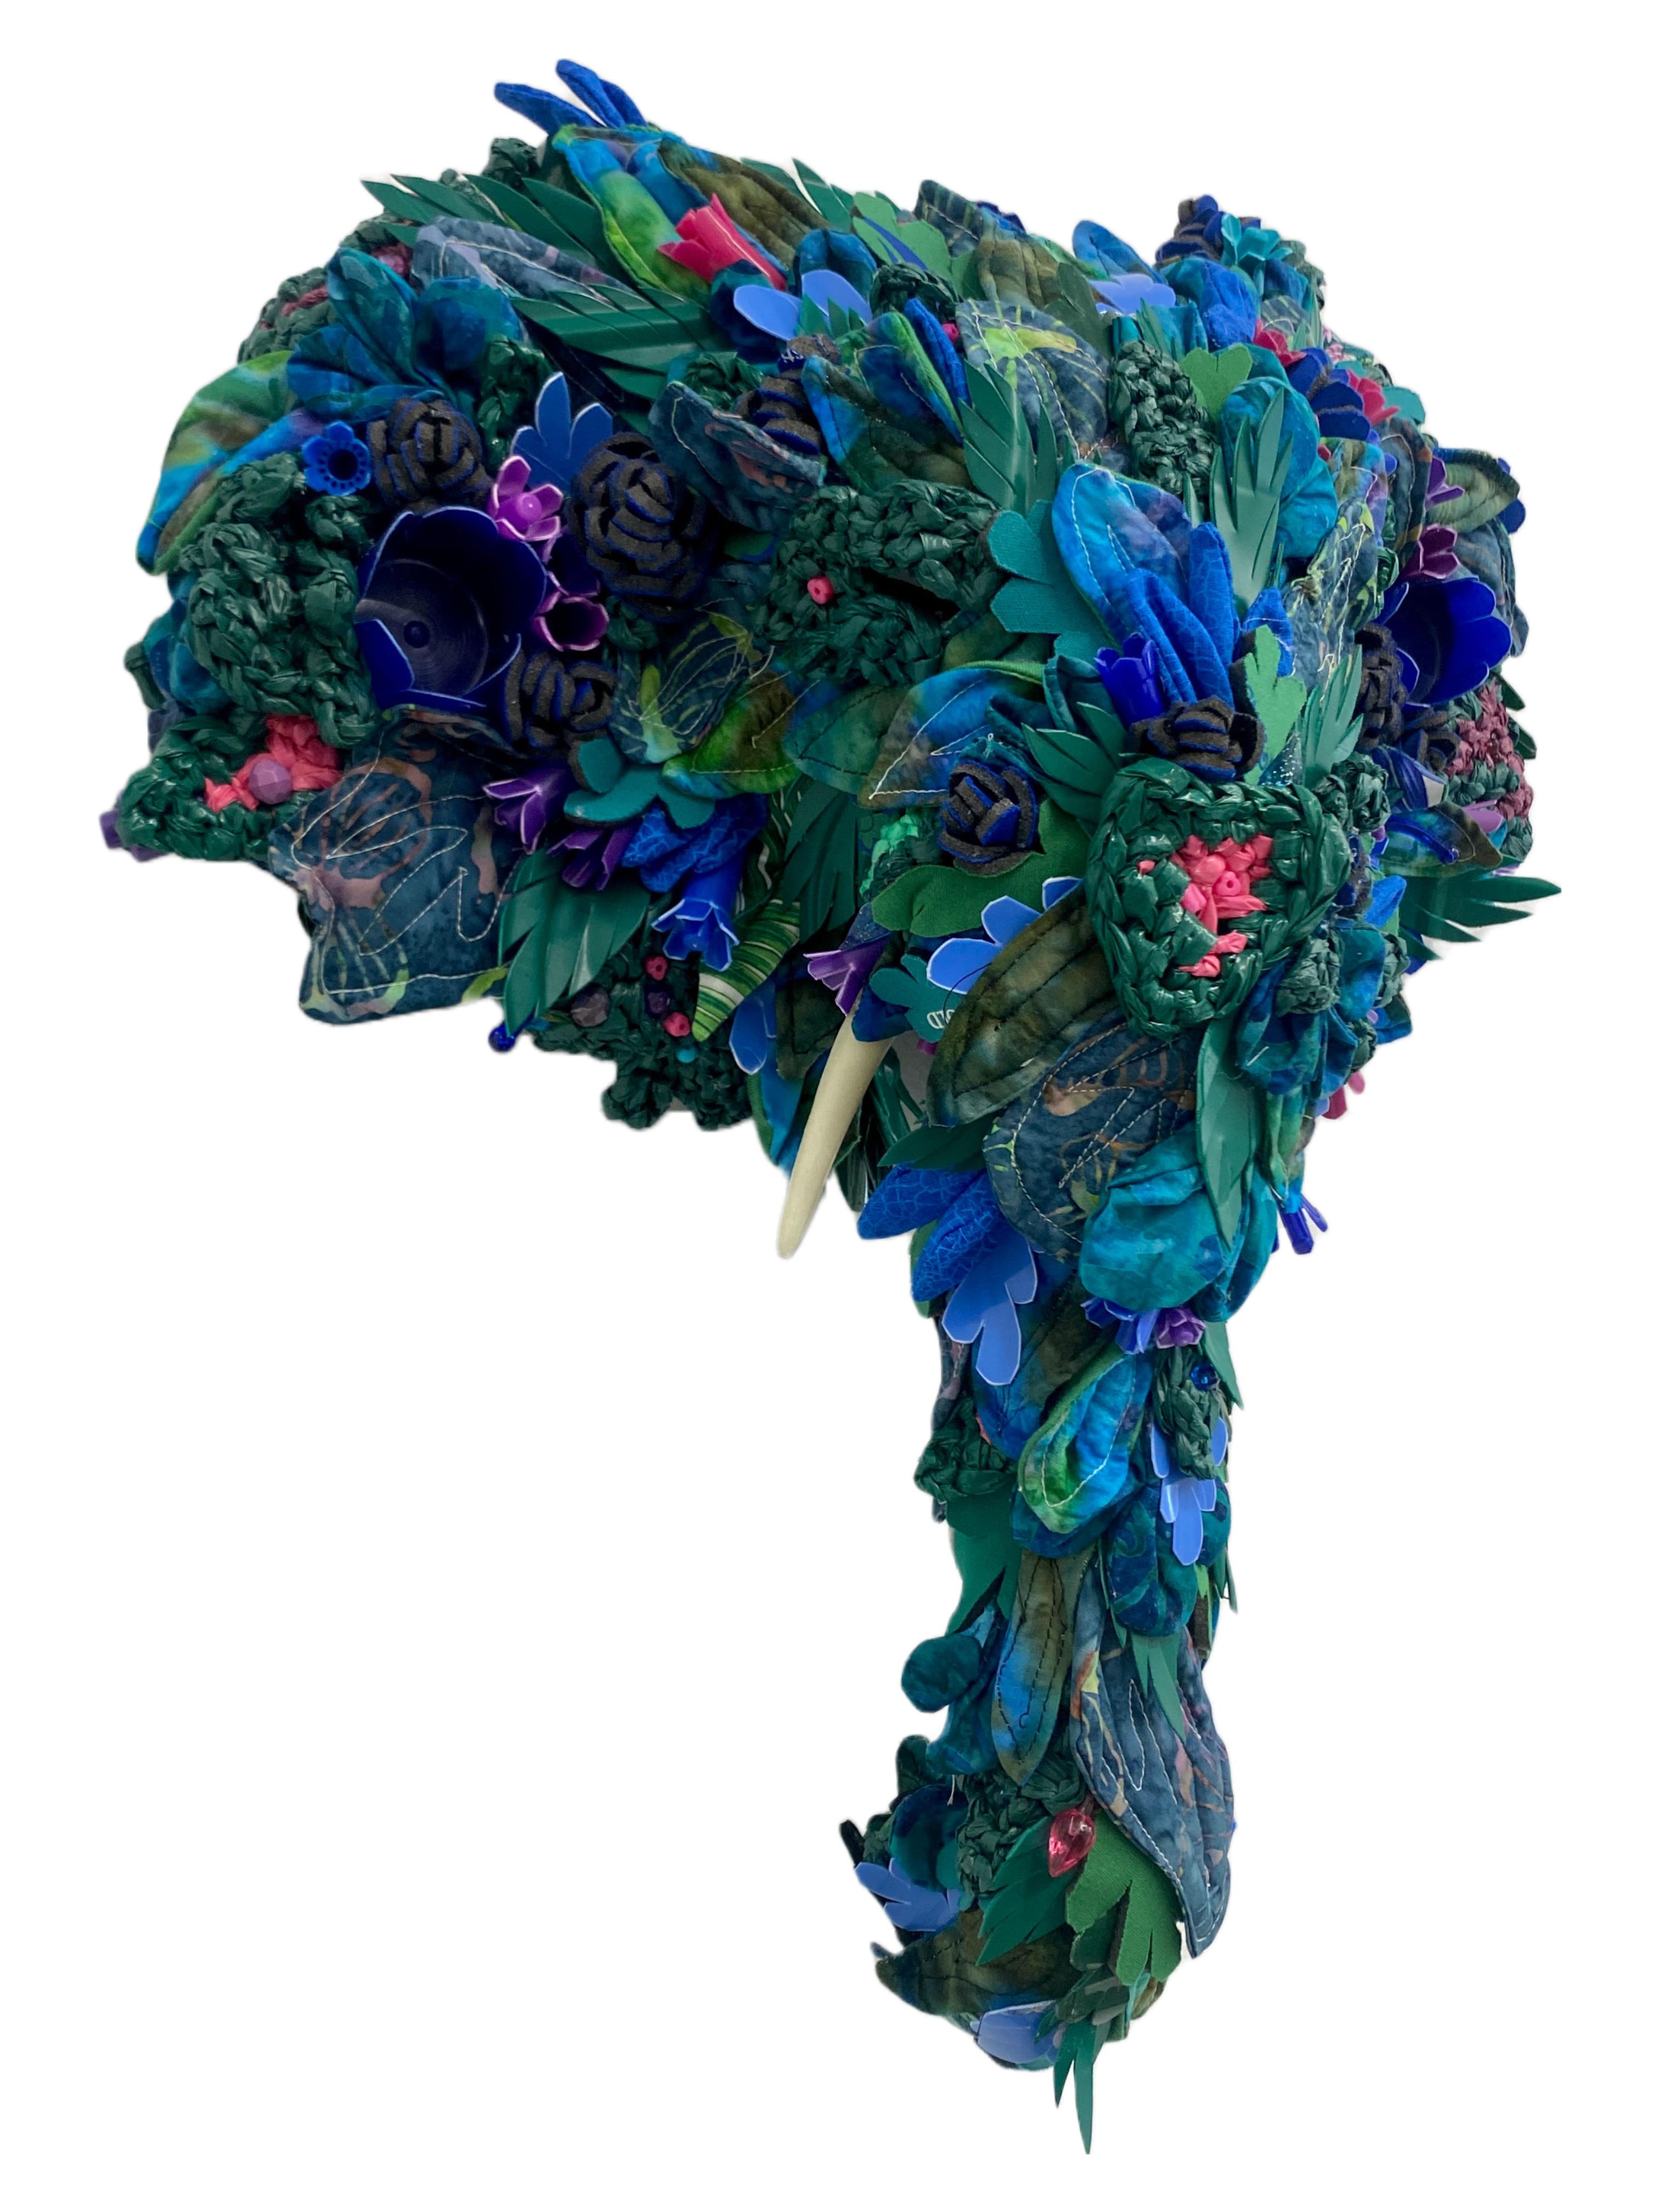 Elephant Plant, Contemporary Wall Sculpture, Recycled Material Assemblage - Blue Figurative Sculpture by Calder Kamin